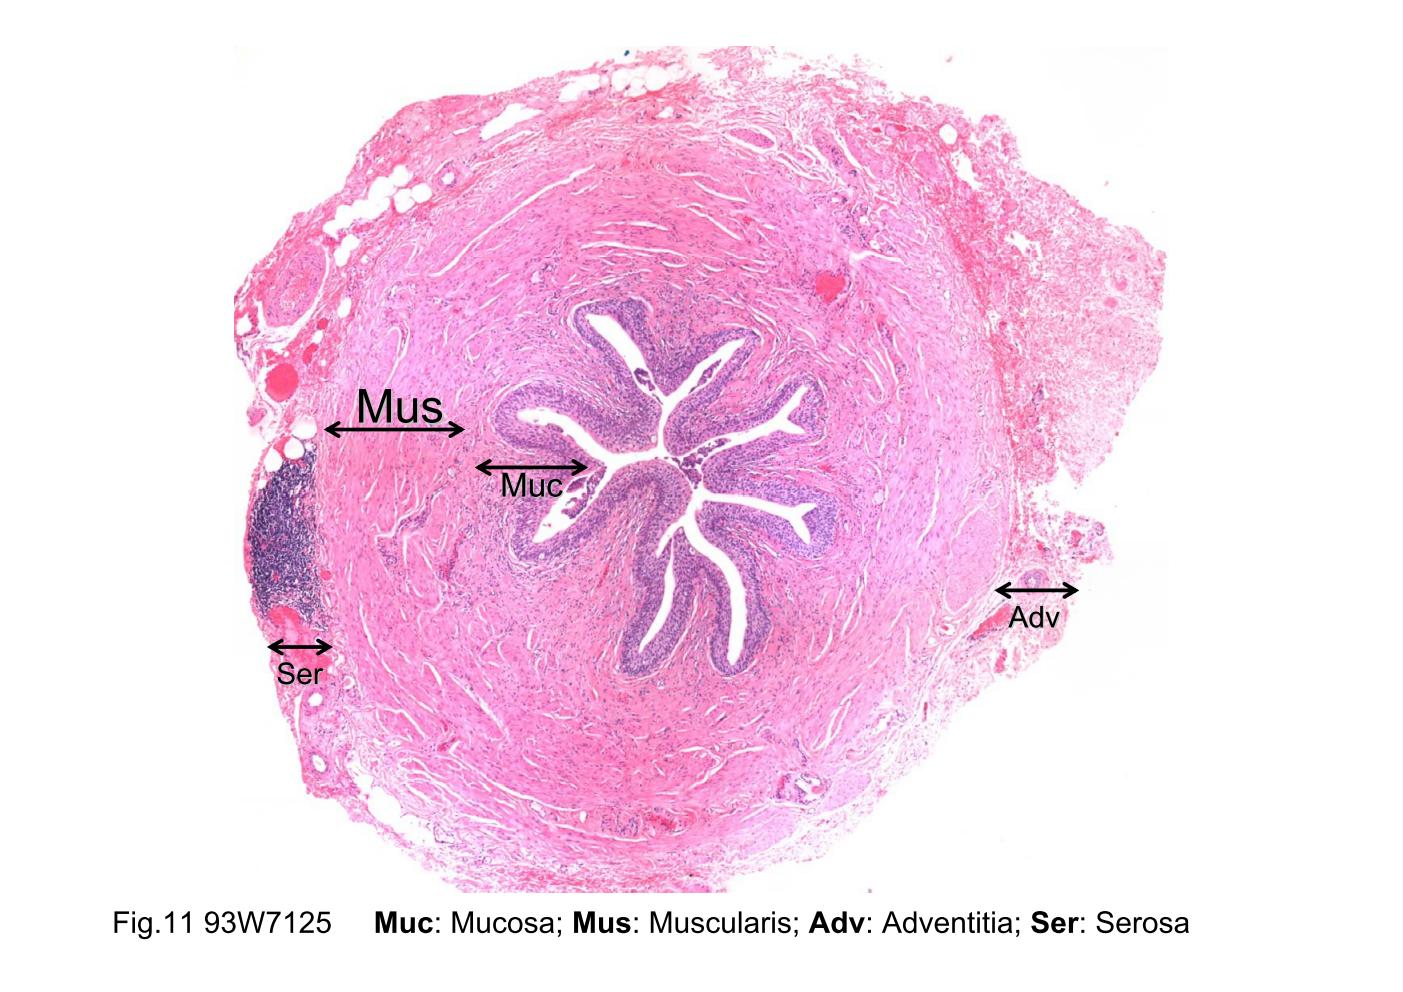 block8_19.jpg - Fig.11 93W7125, Ureter (cs) , HE. As shown in this low-power orientation micrograph, the wall of the ureter consistsof a mucosa (Muc), a muscularis (Mus), and an adventitia(Adv). Note that the ureters are located behind theperitoneum of the abdominal cavity in their course to thebladder. Thus, a serosa (Ser) may be found covering aportion of the circumference of the tube. Also, because ofcontraction of the smooth muscle of the muscularis, theluminal surface is characteristically folded, thus creating astar-shaped lumen.